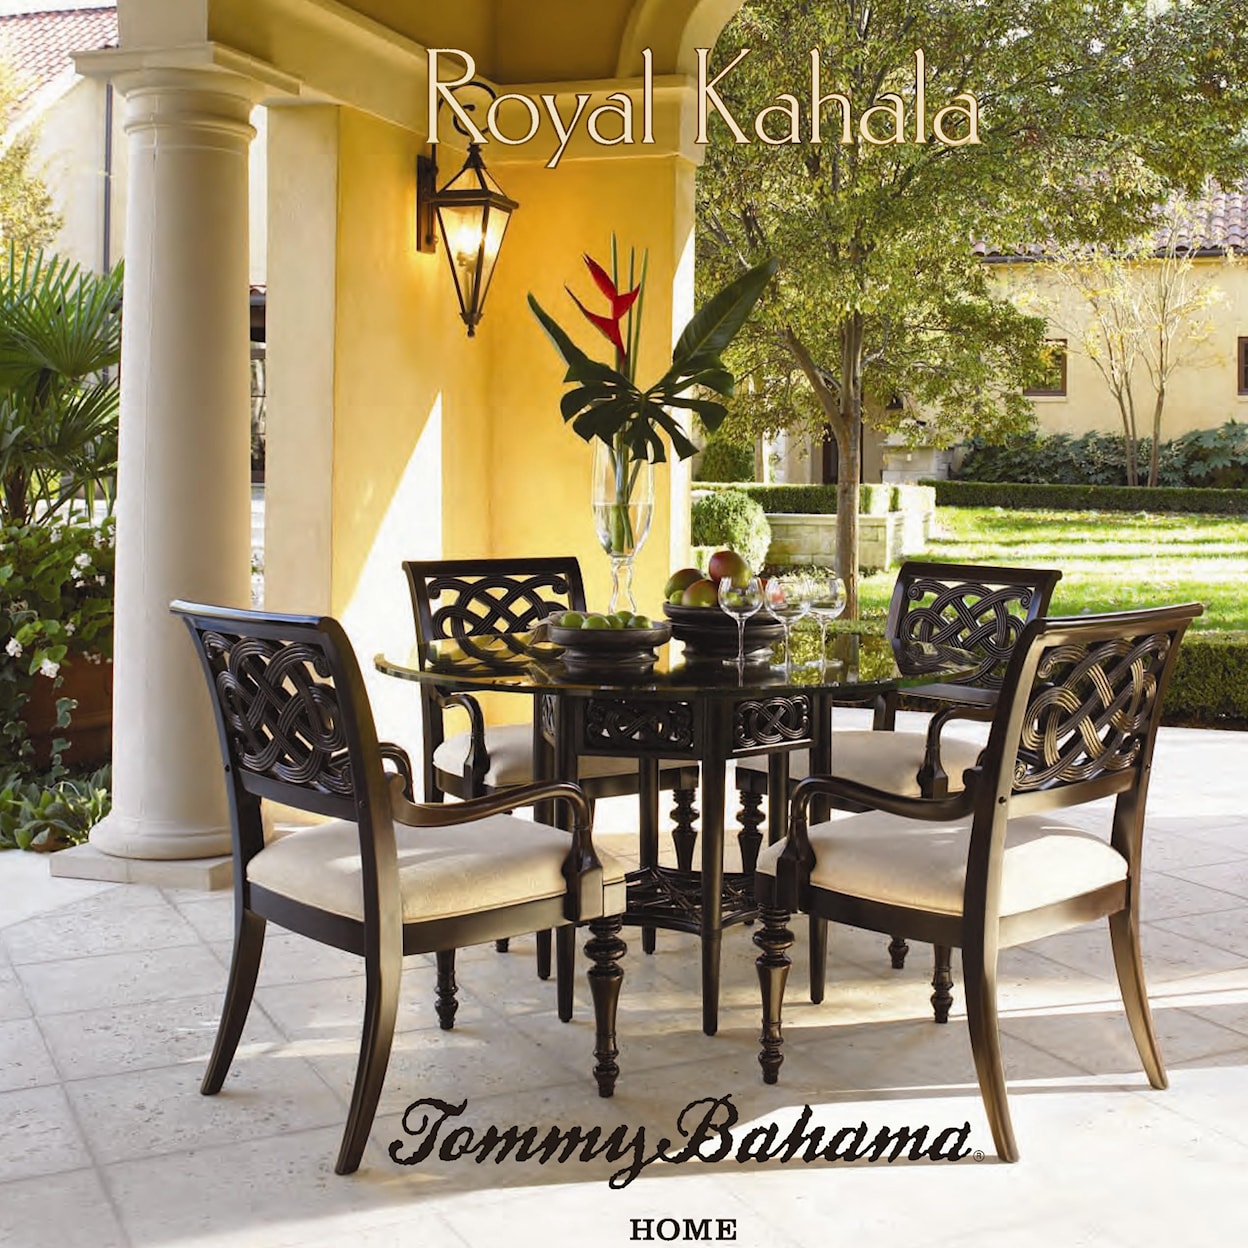 Tommy Bahama Home Royal Kahala Oval Reef Accent Table